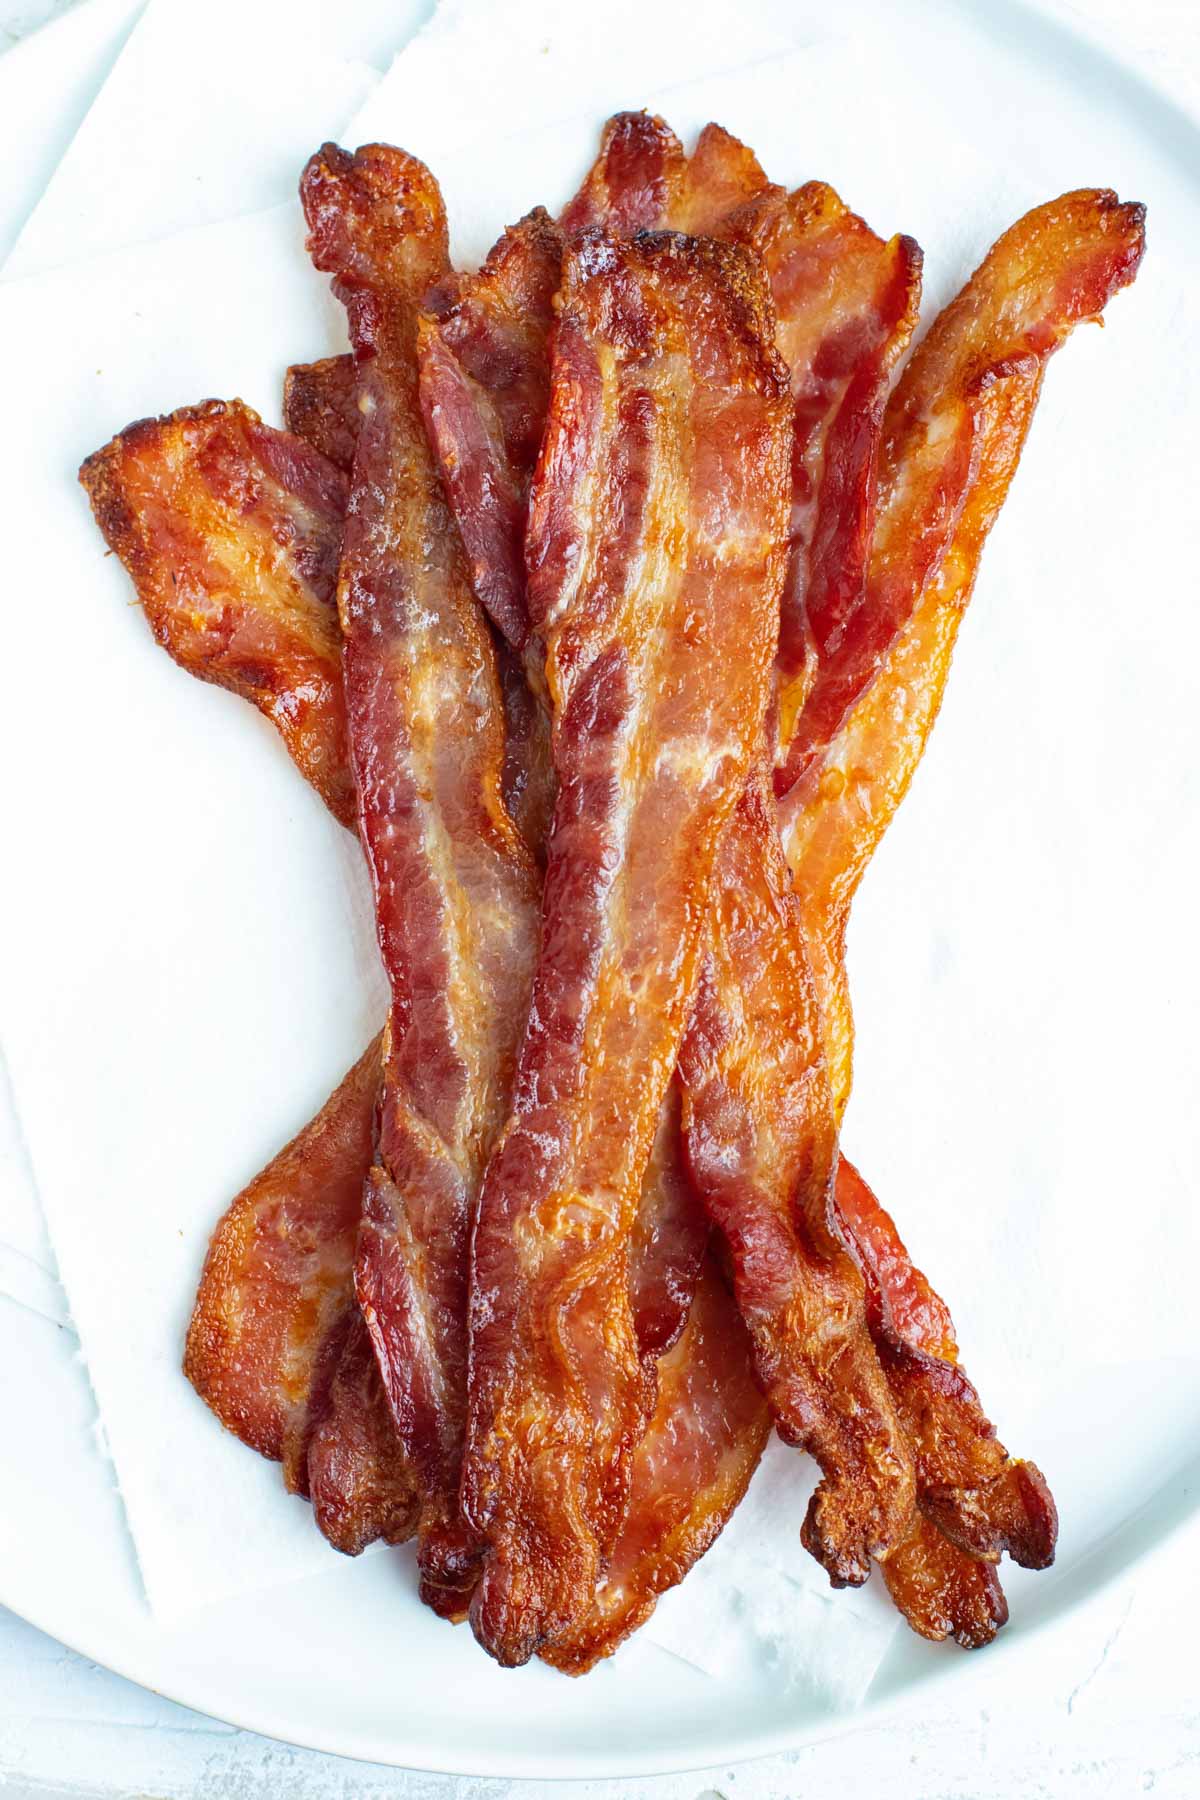 Bacon strips that have been cooked in the oven draining on paper towels.